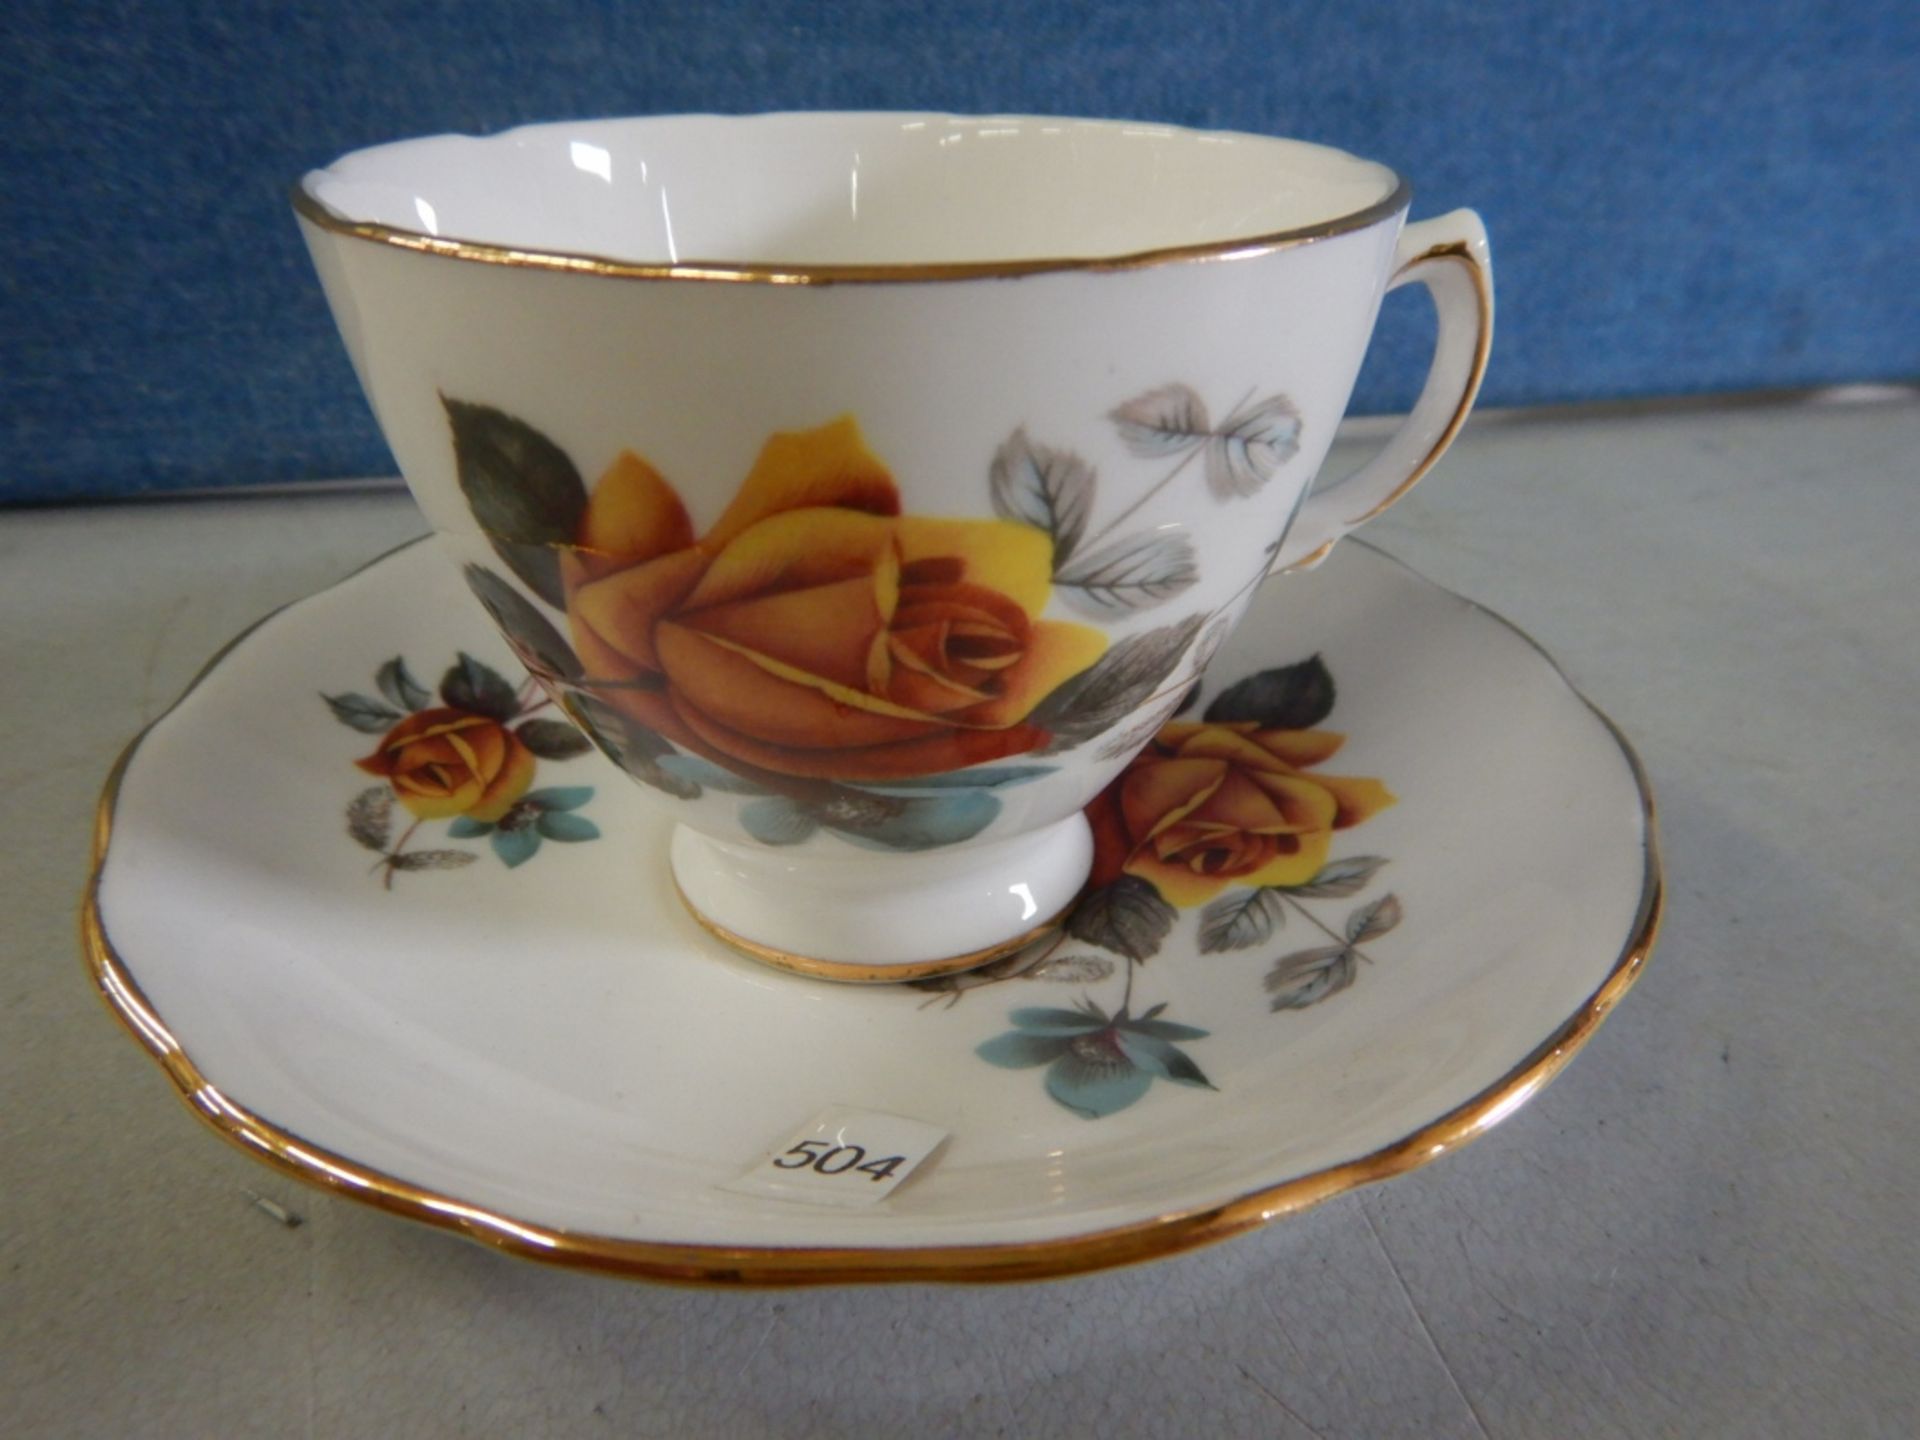 ANTIQUE TEACUPS & SAUCERS - MADE IN ENGLAND - LOT OF 7 - BONE CHINA #8273 - YELLOW FLOWERS, # - Image 29 of 33